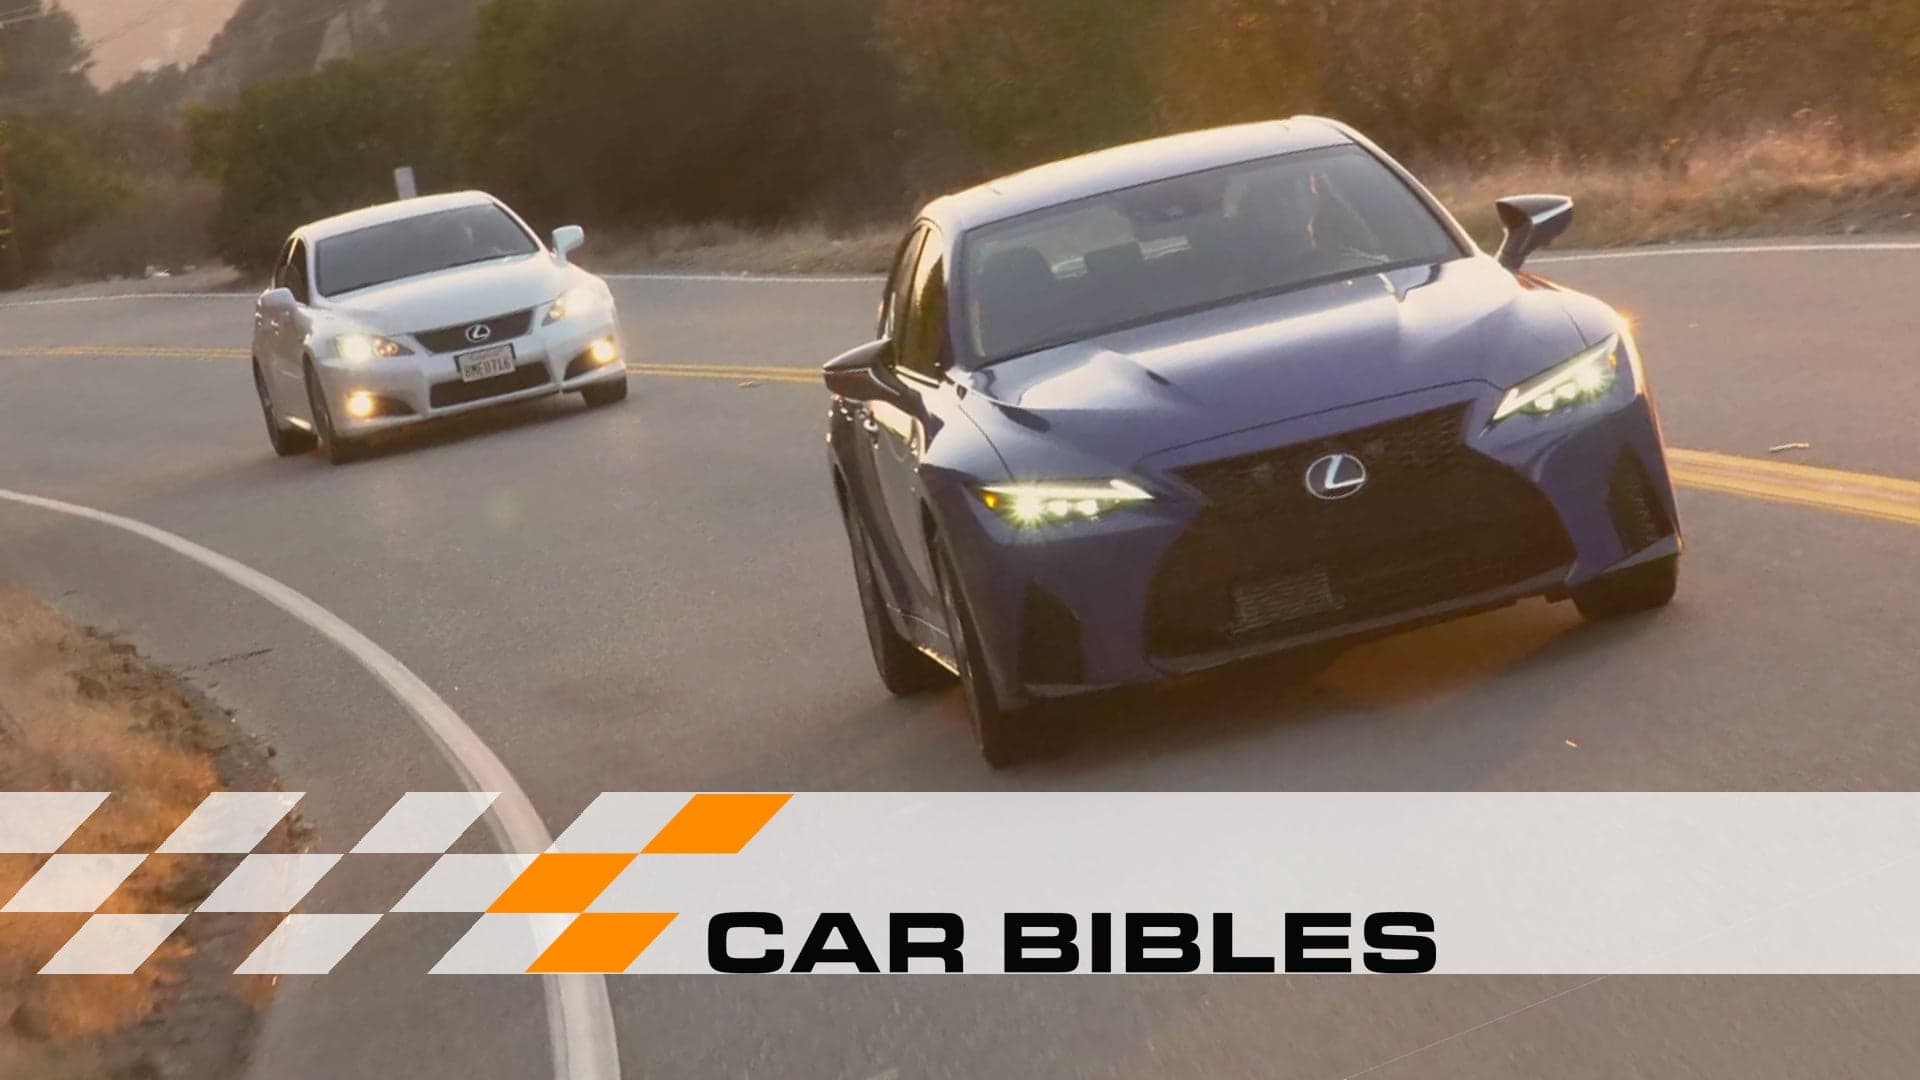 See How Similar the New Lexus IS 500 and Old IS F Really Are in This Car Bibles Video